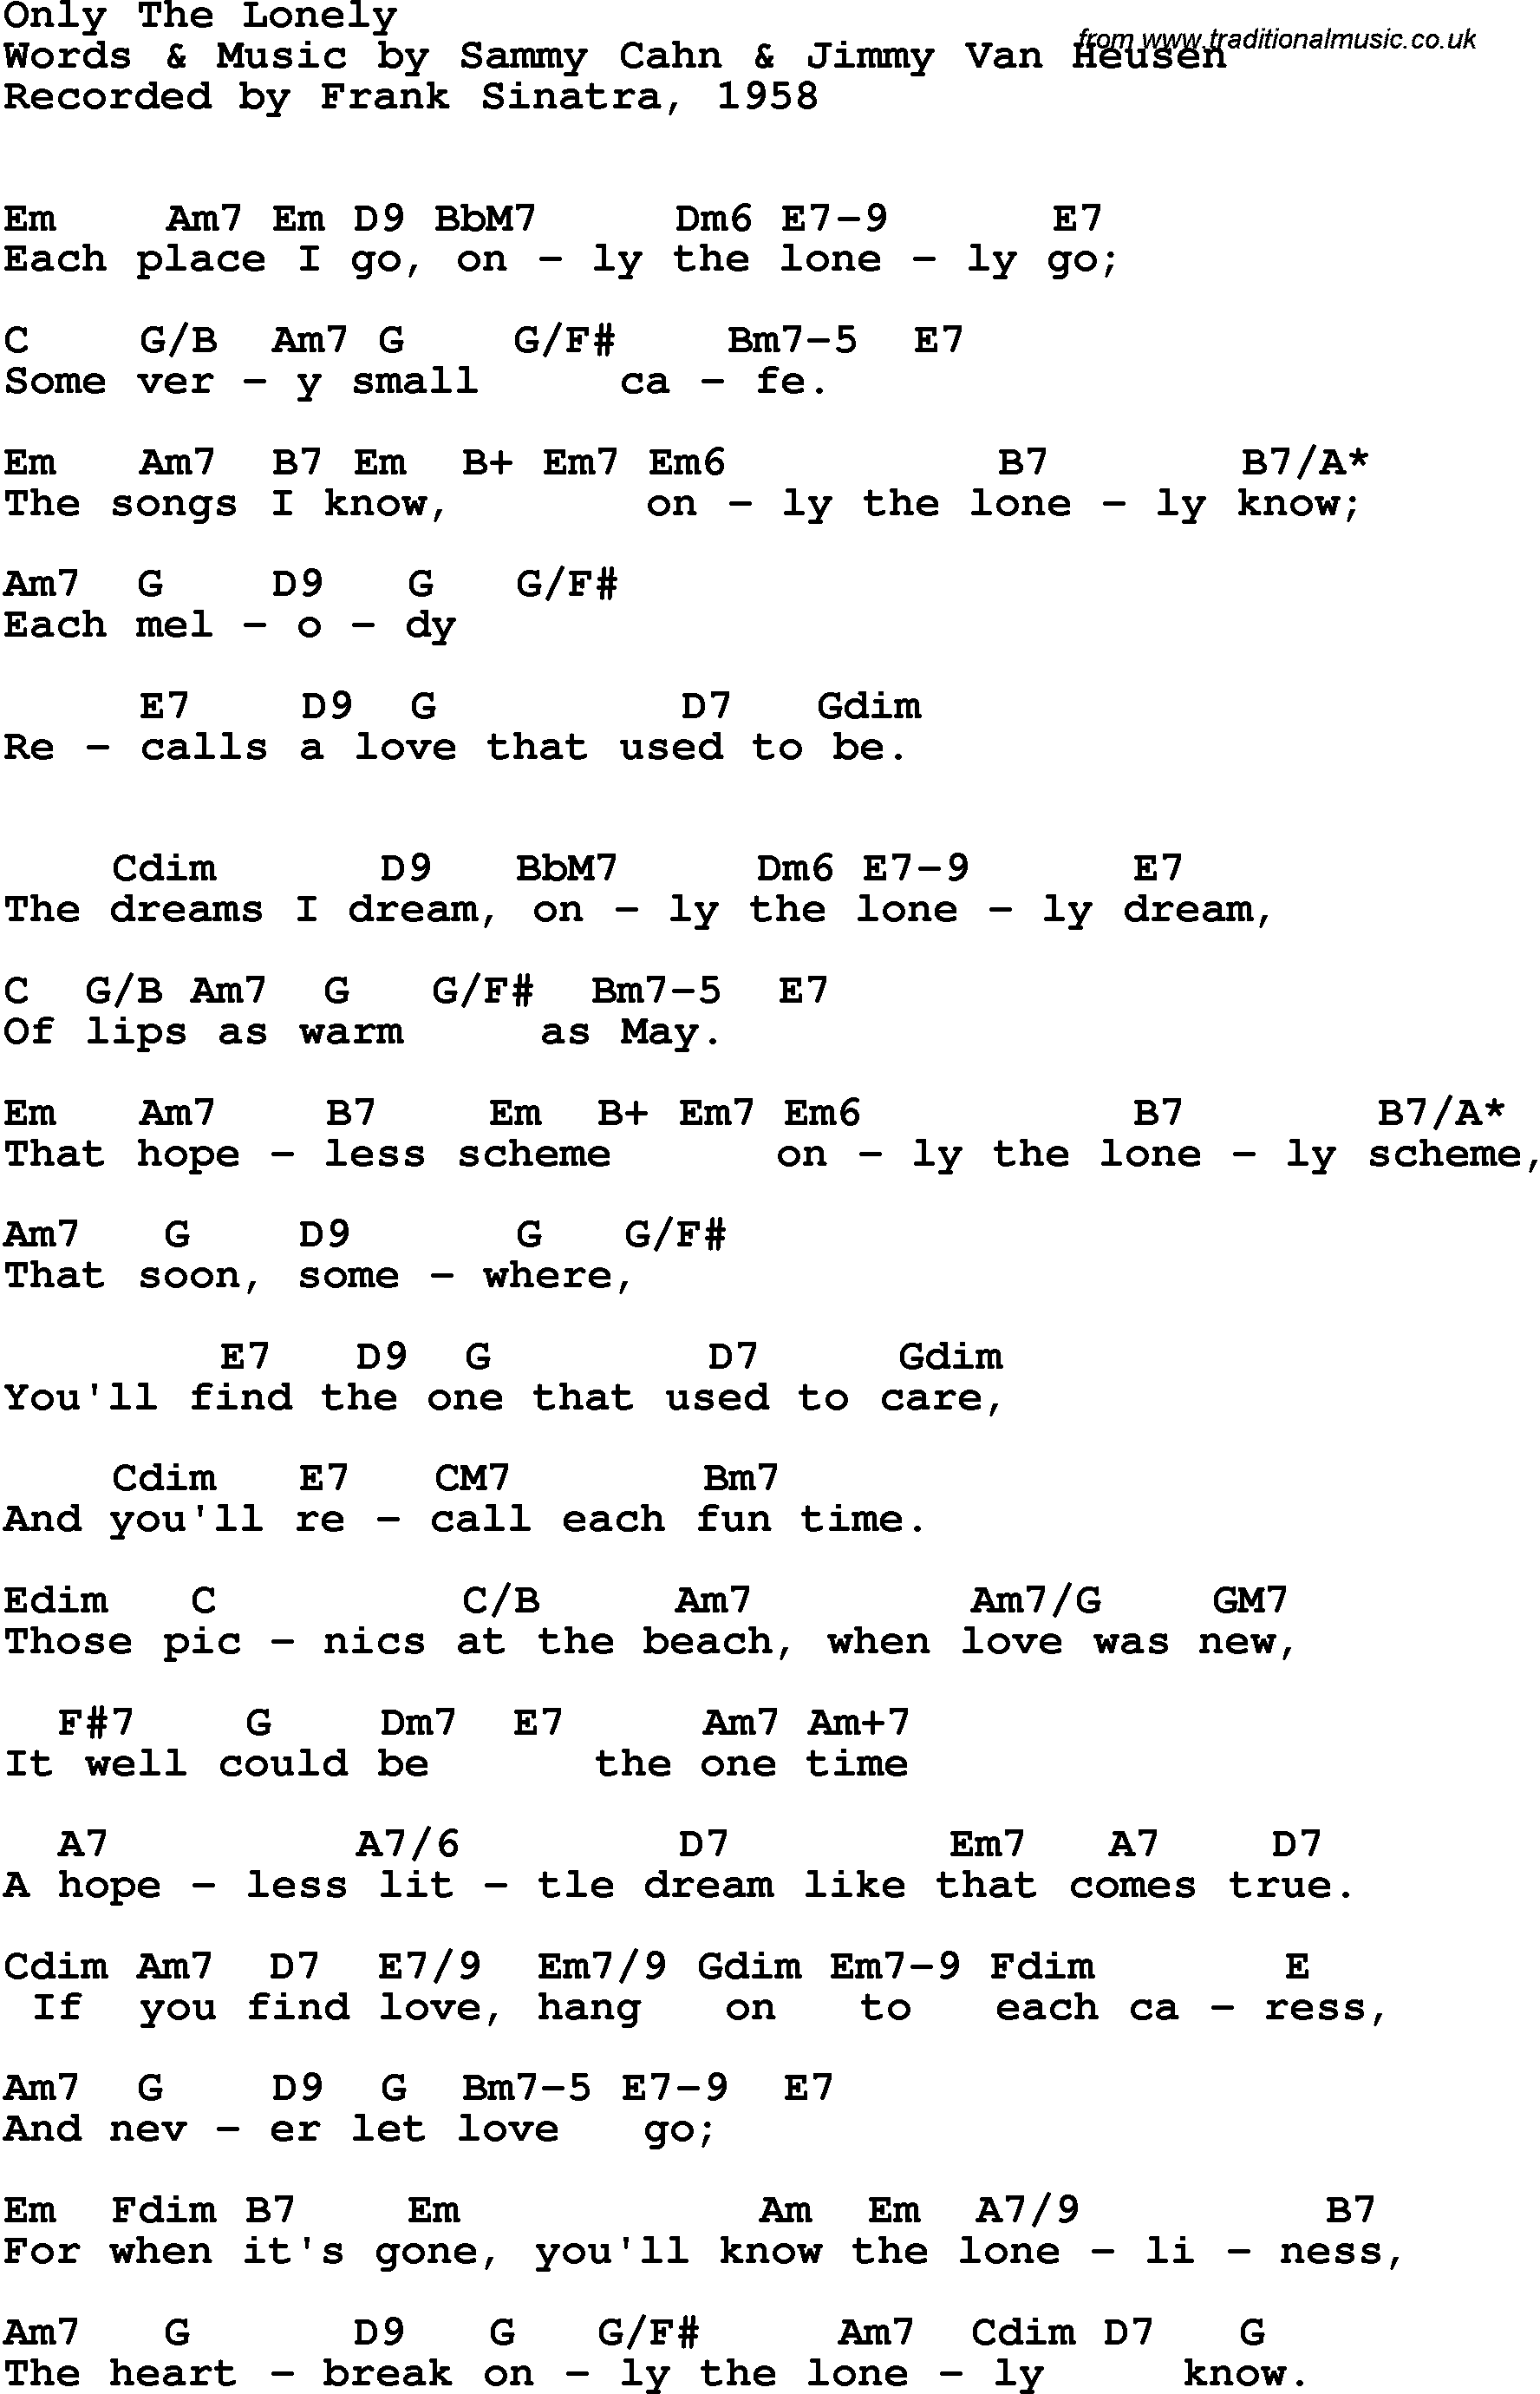 Song Lyrics with guitar chords for Only The Lonely - Frank Sinatra, 1958